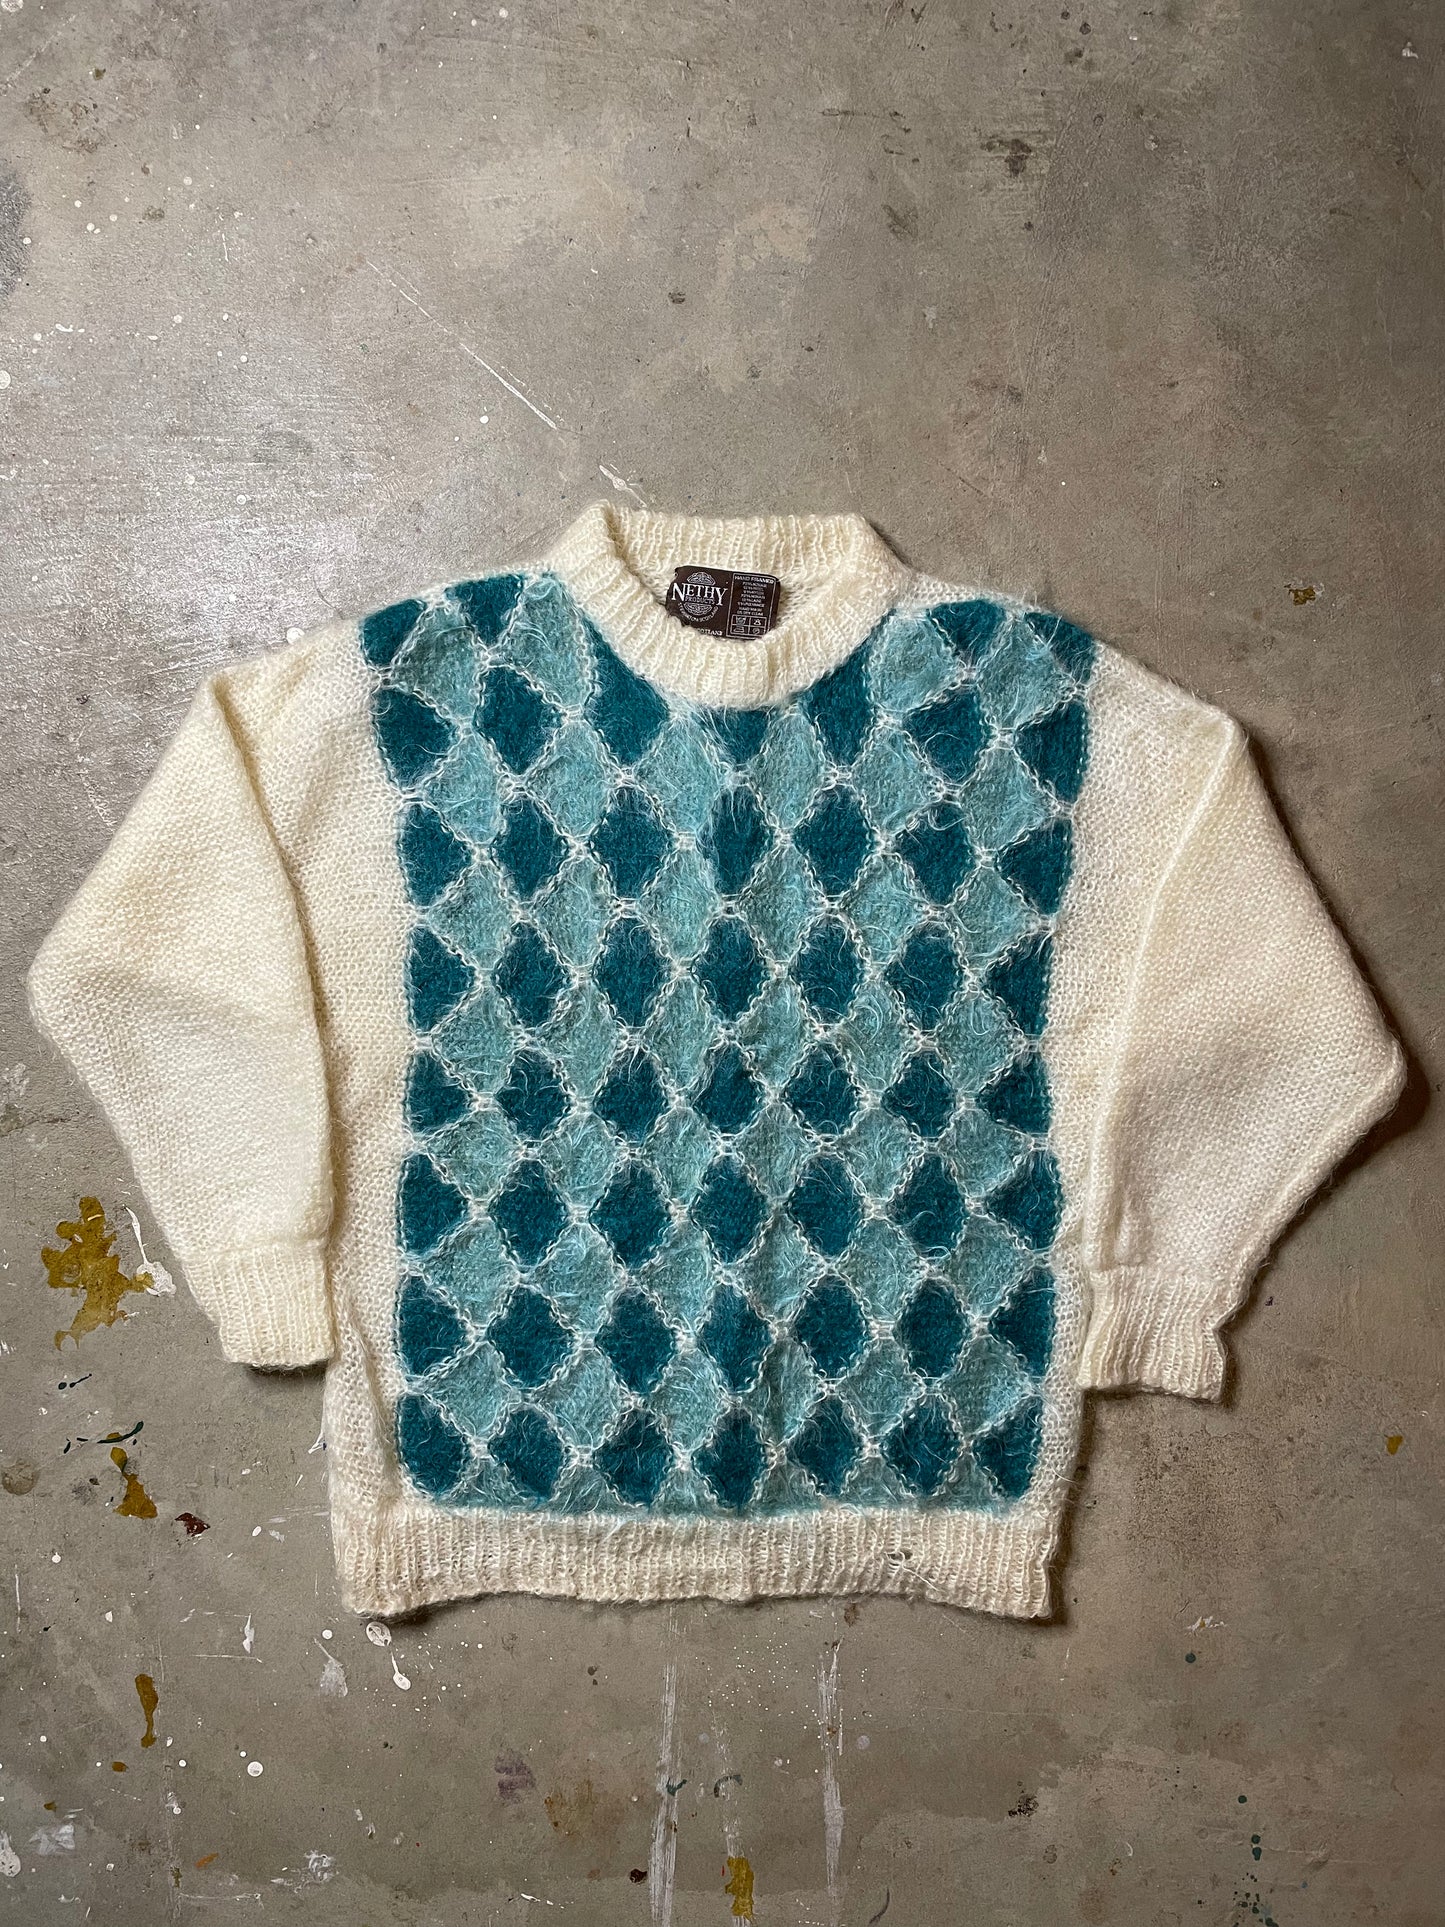 Vintage Nethy Mohair Sweater